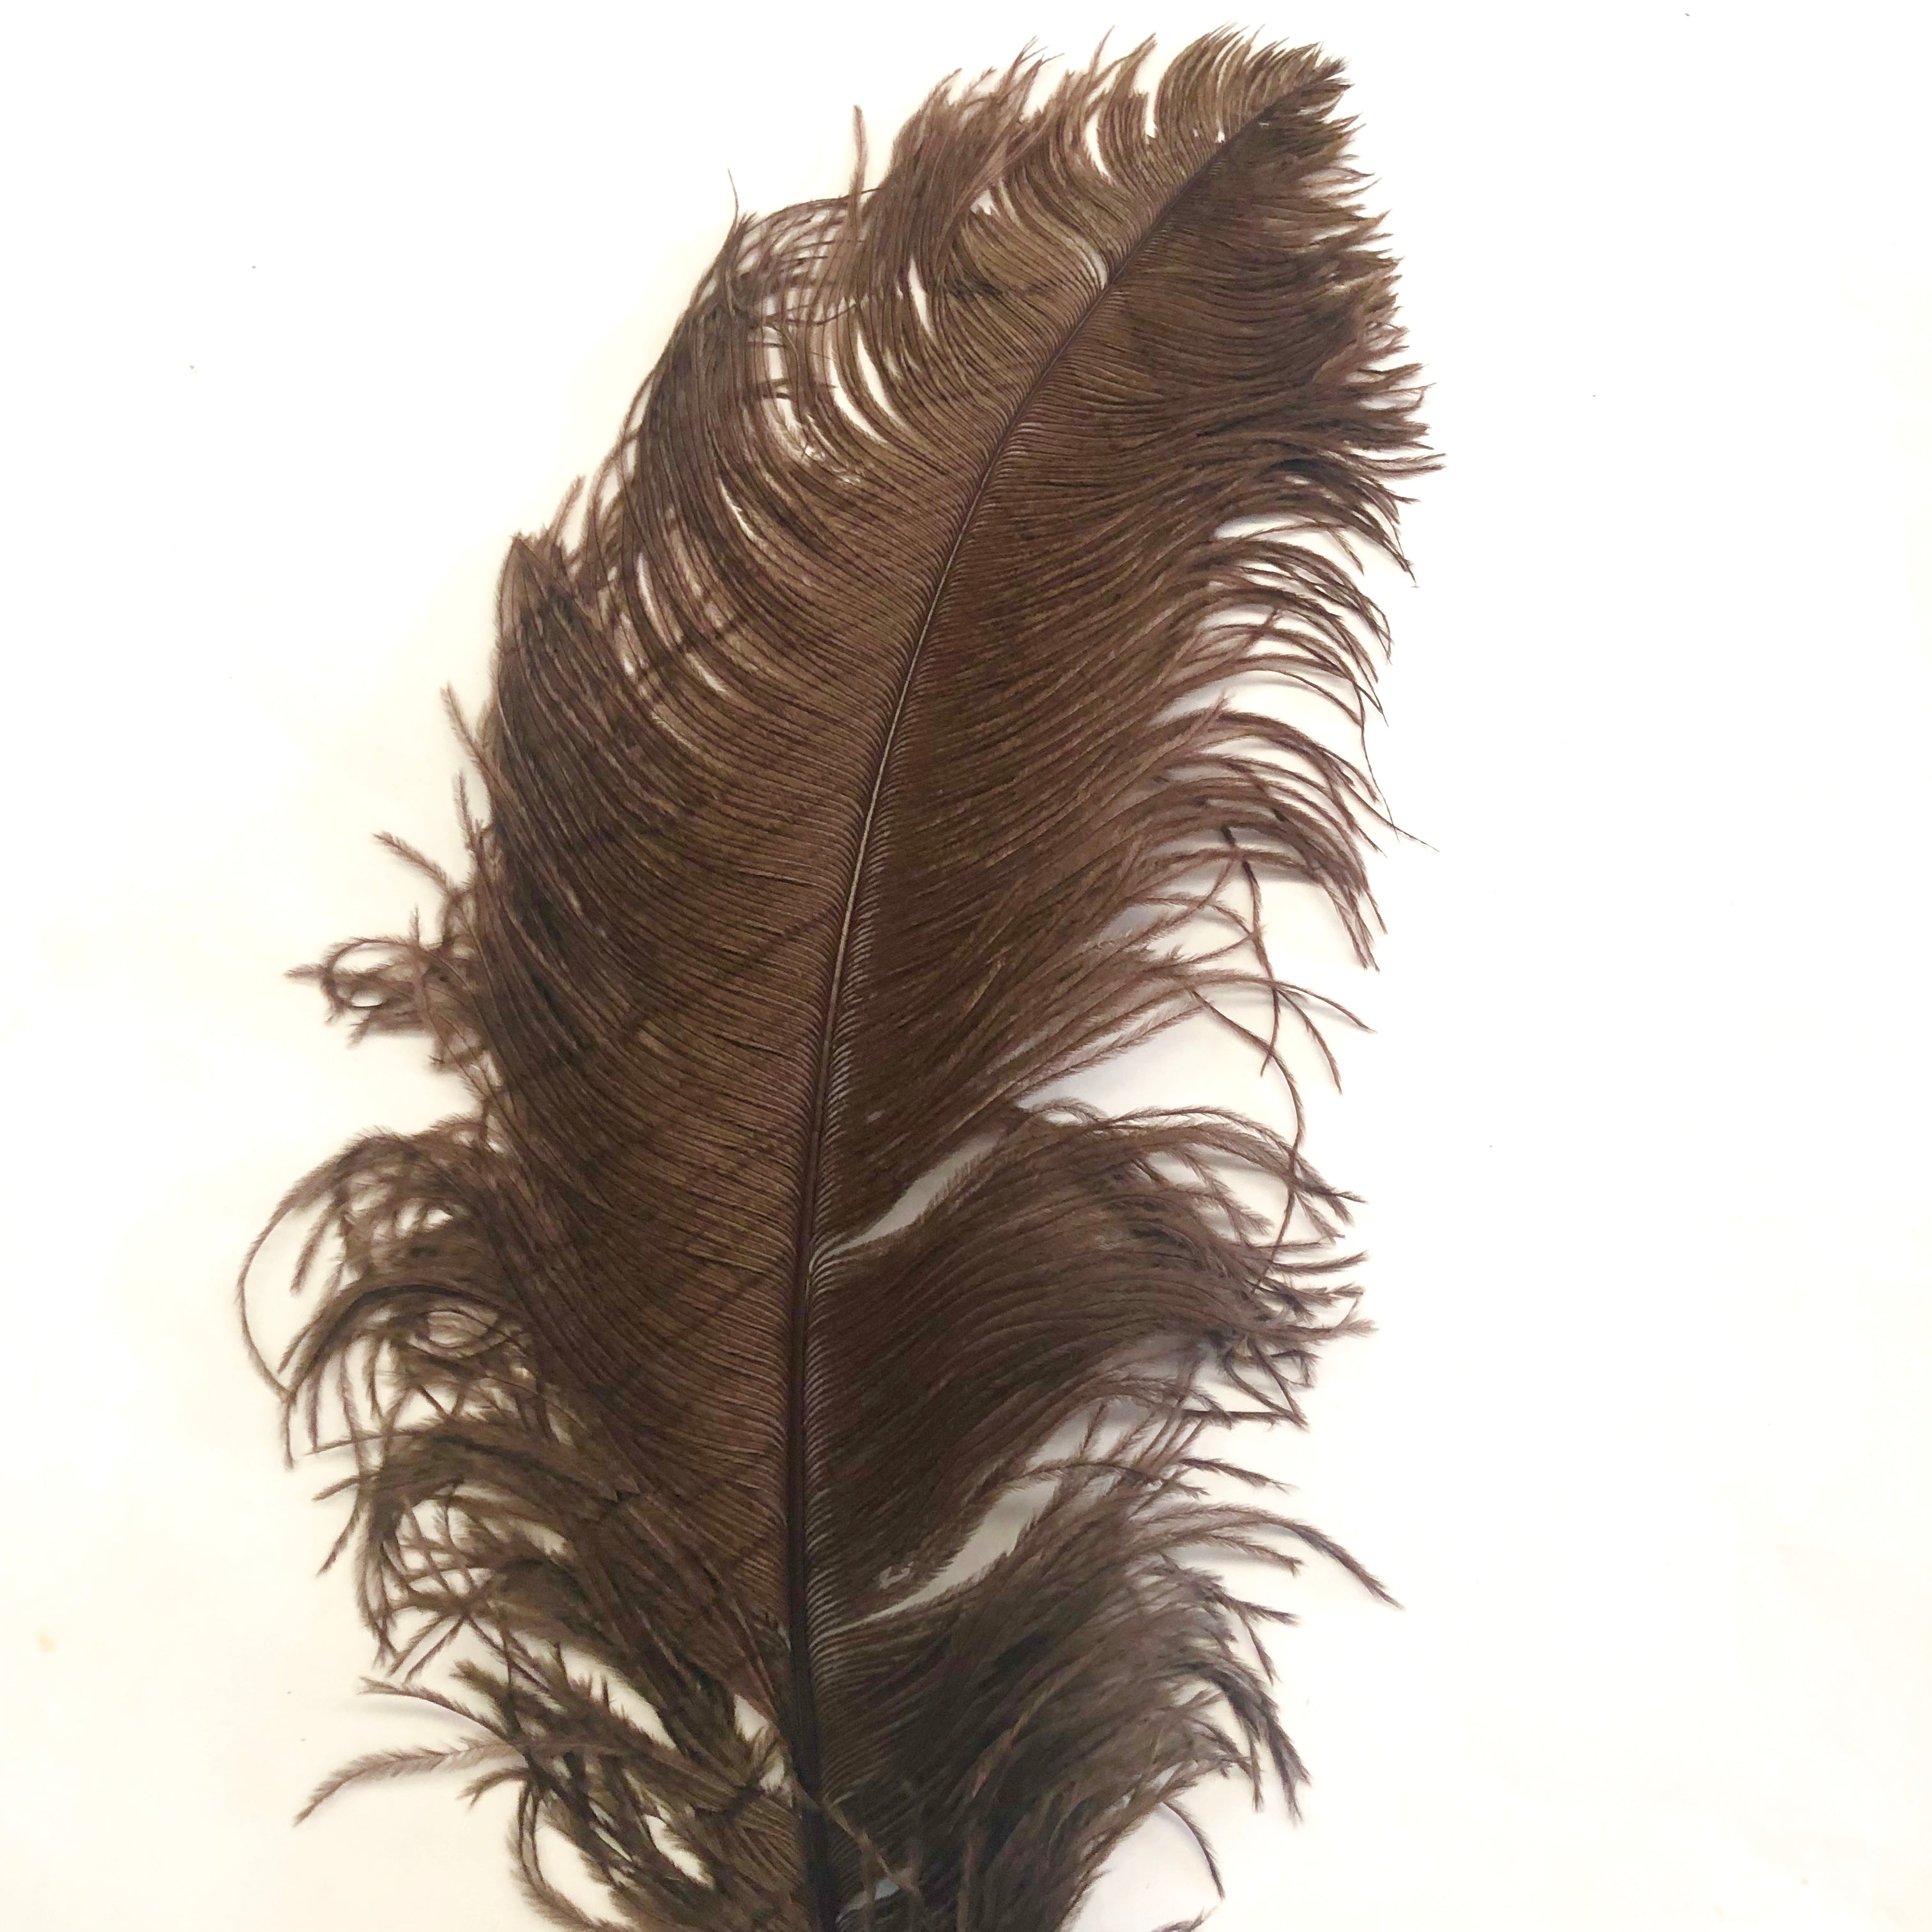 Ostrich Wing Feather Plumes 50-55cm (20-22") - Chocolate Brown ((SECONDS))